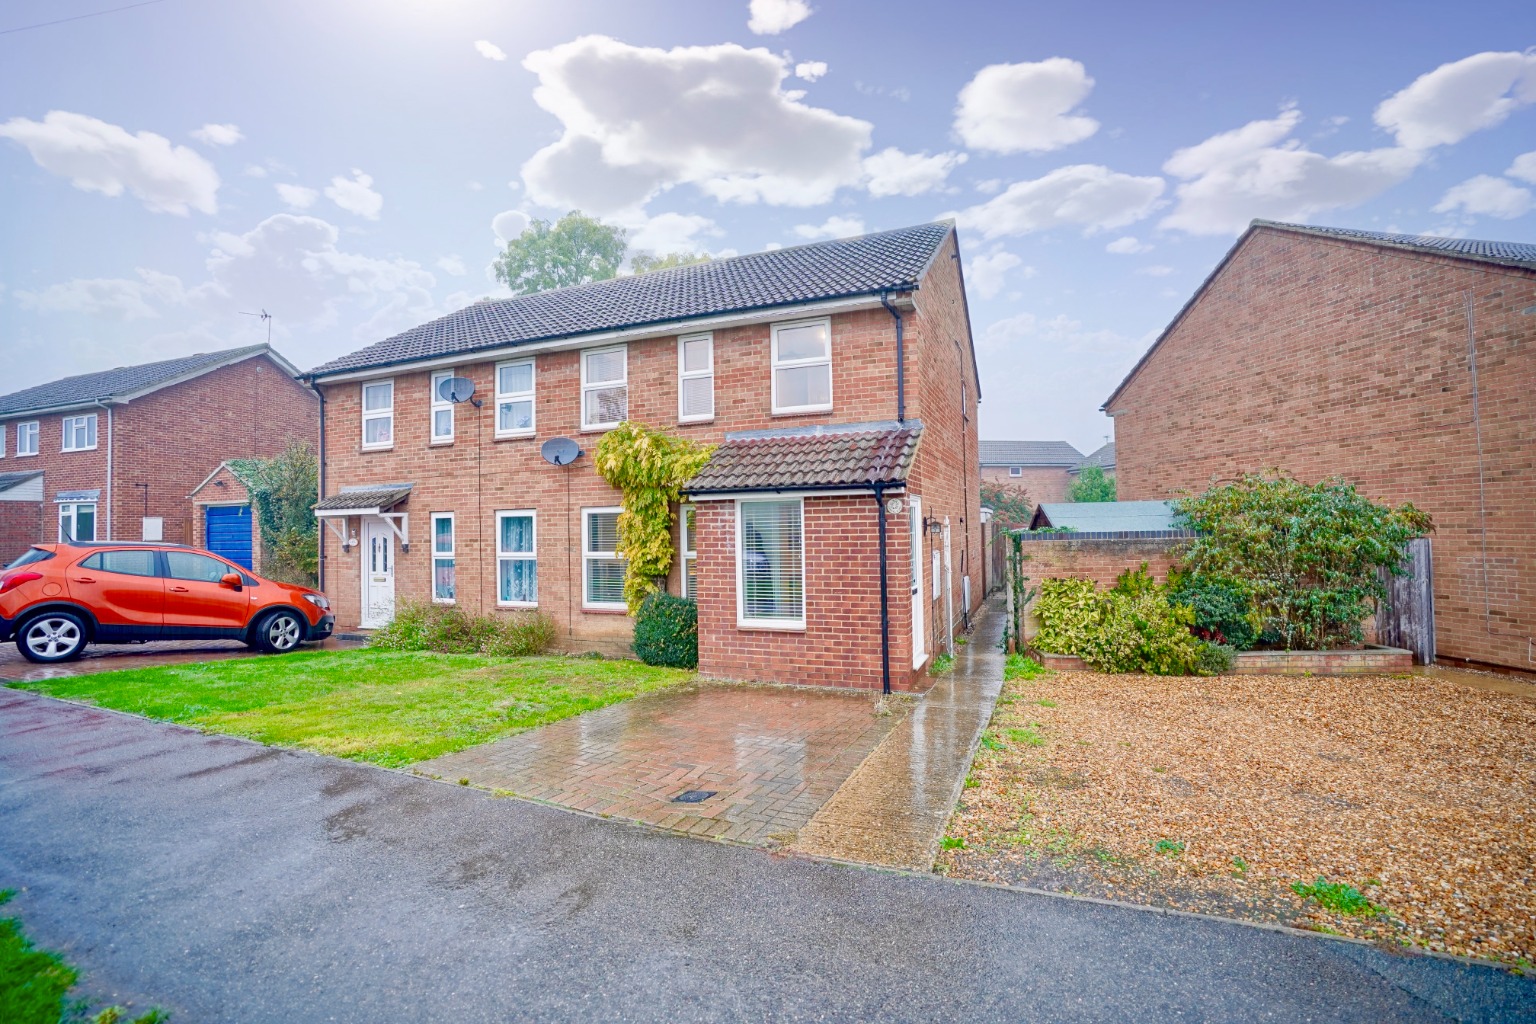 3 bed semi-detached house for sale in Chapel Road, Huntingdon - Property Image 1